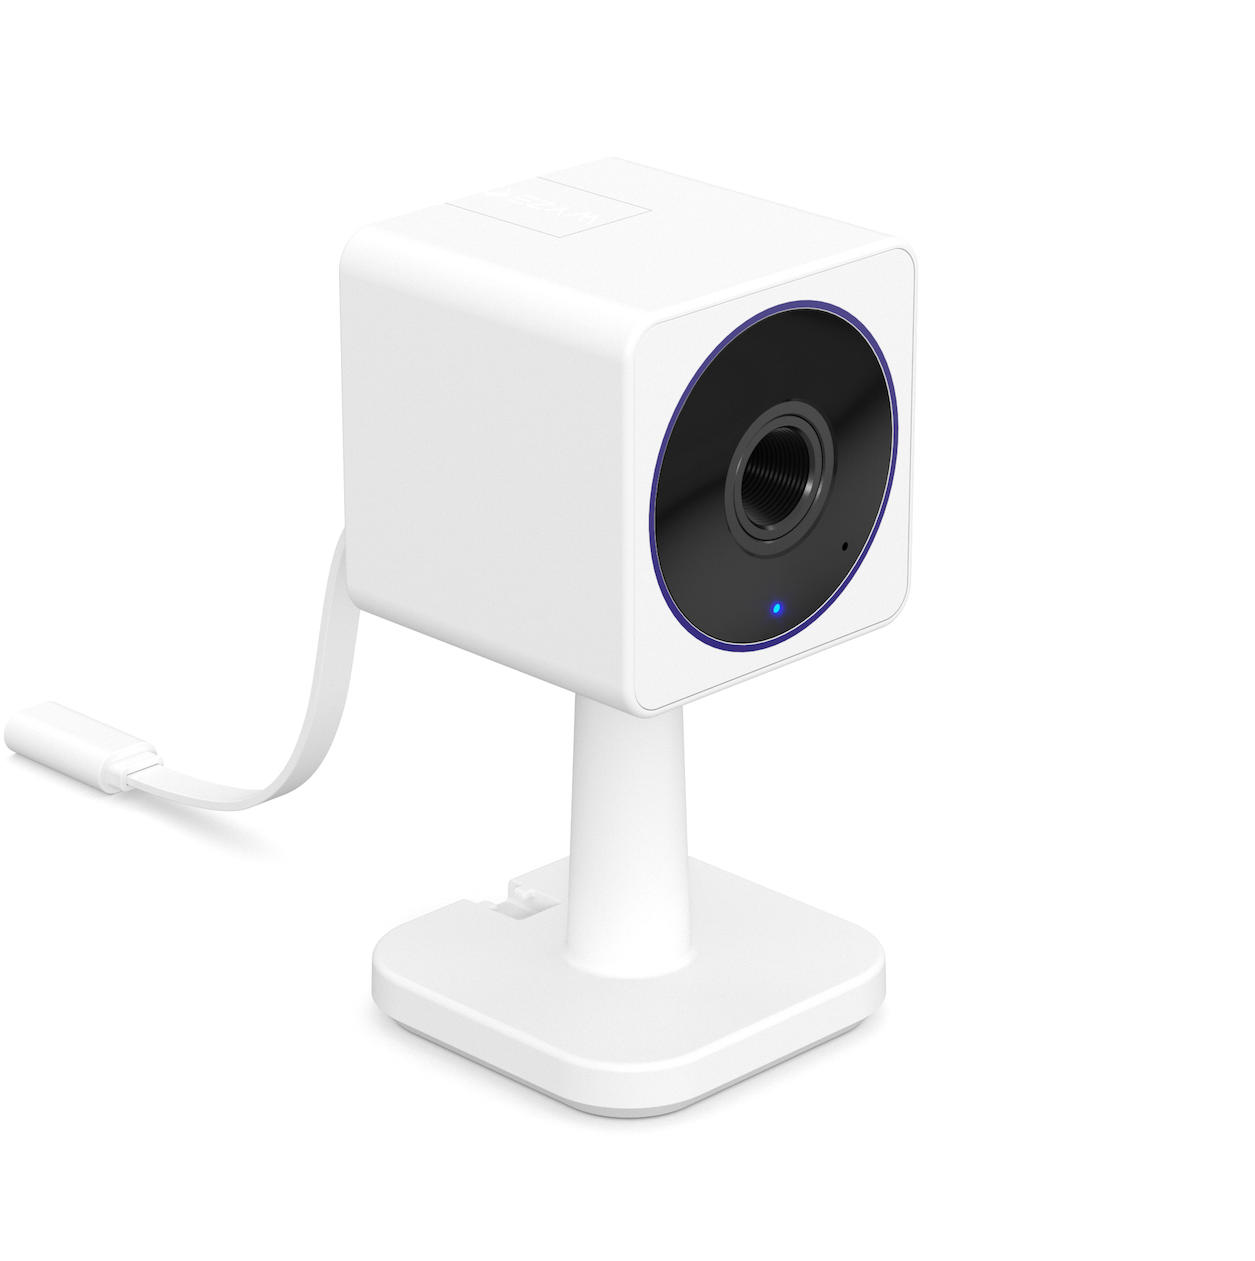 3D render of Wyze Cam OG Telephoto security camera against a white background.